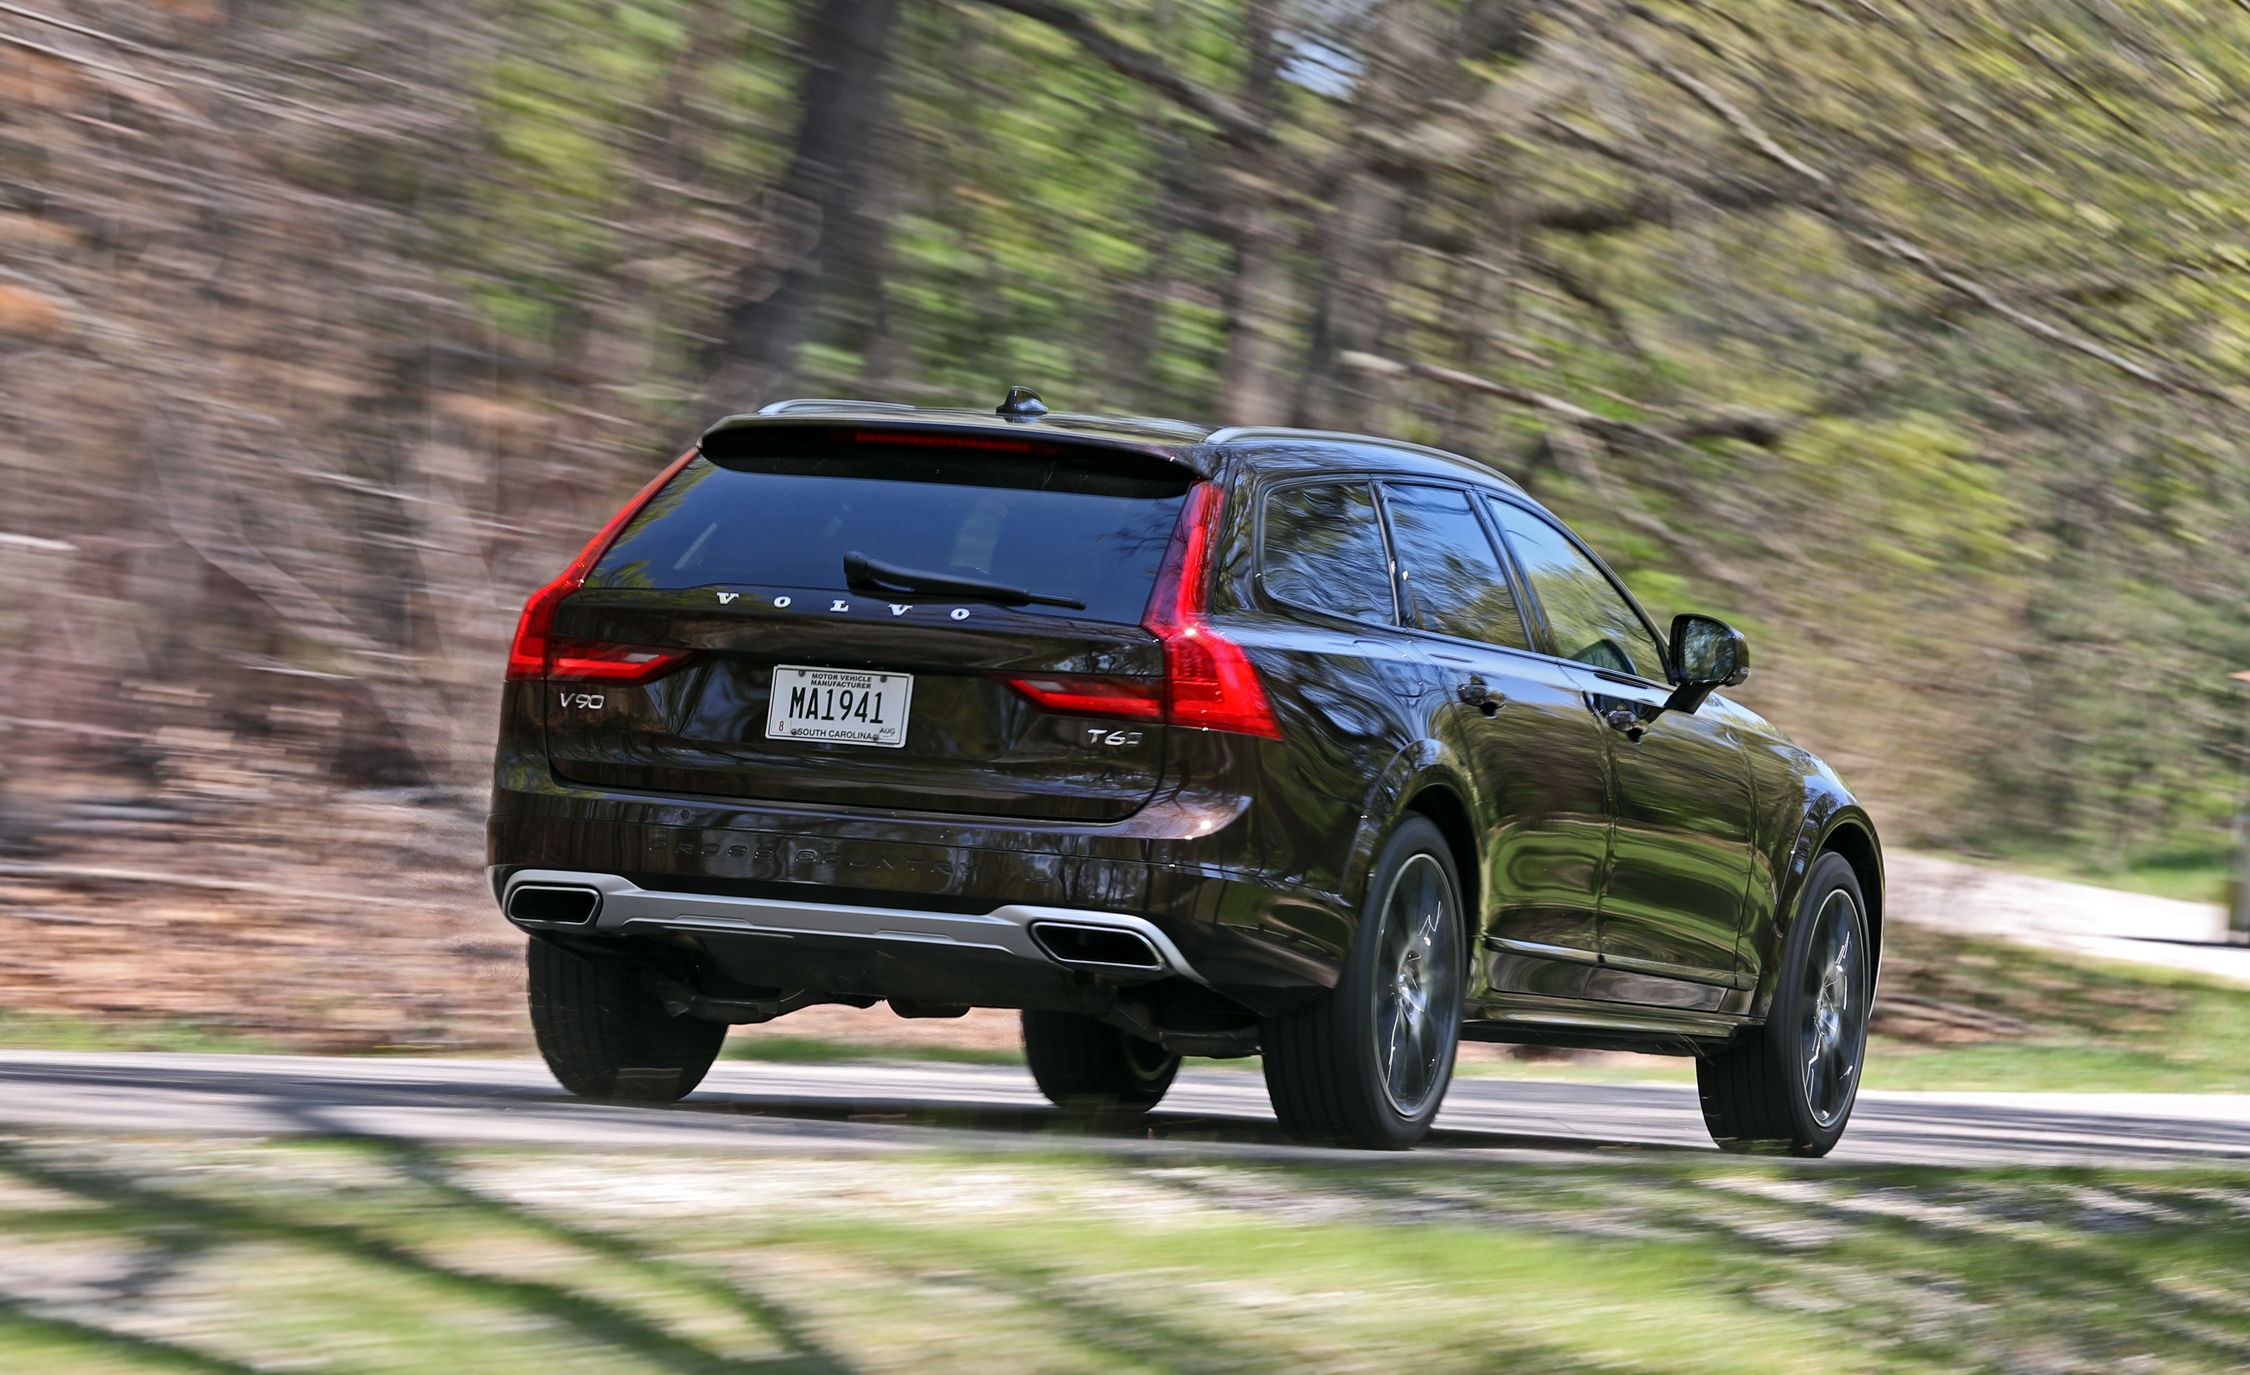 2017 Volvo V90 Cross Country review - Drive